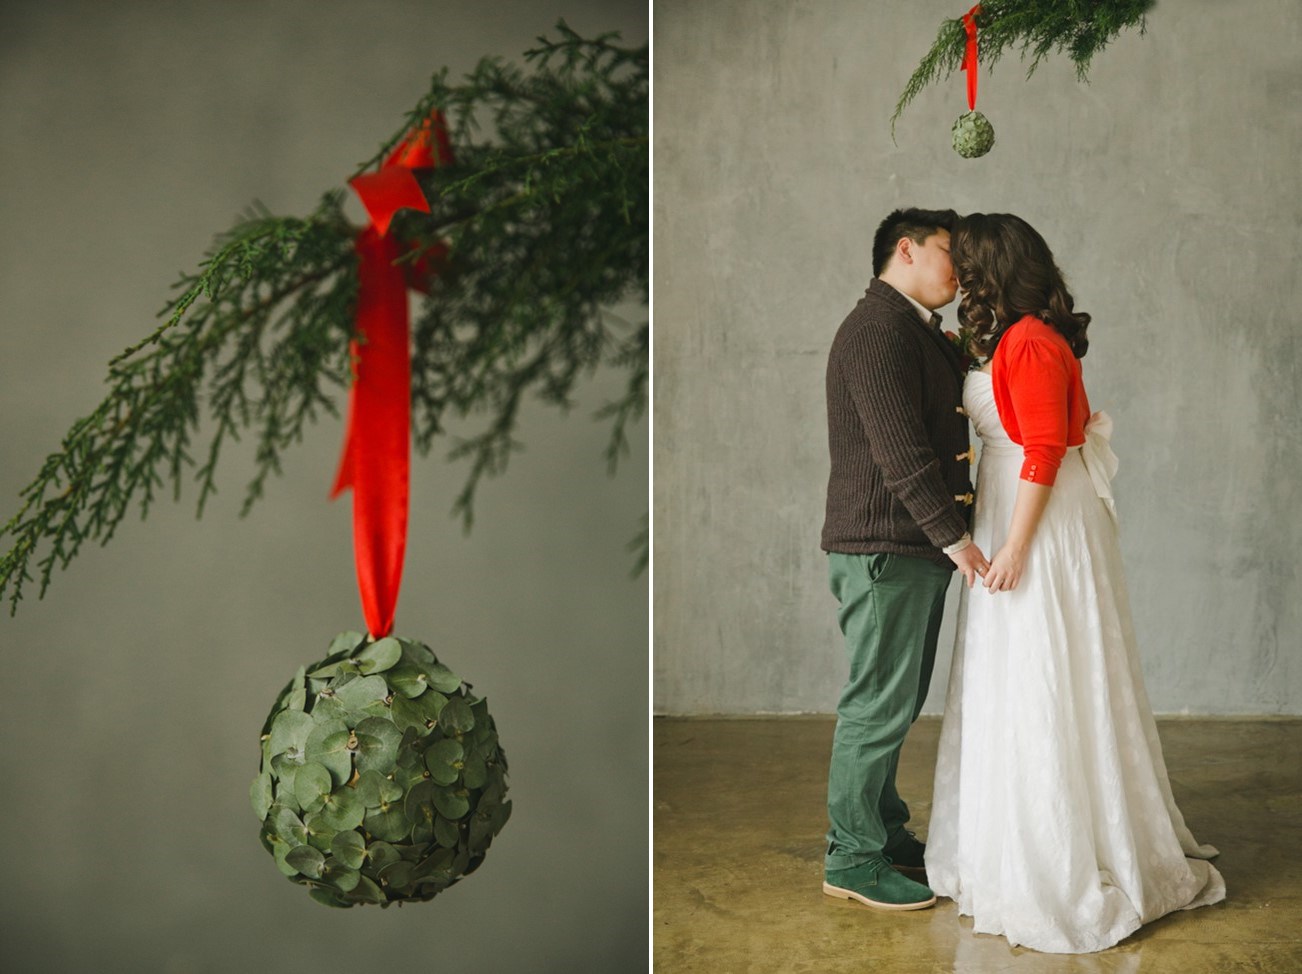 Mistletoe Ball - A Cosy Christmas Wedding Inspiration Shoot in Red, Green & White from WarmPhoto